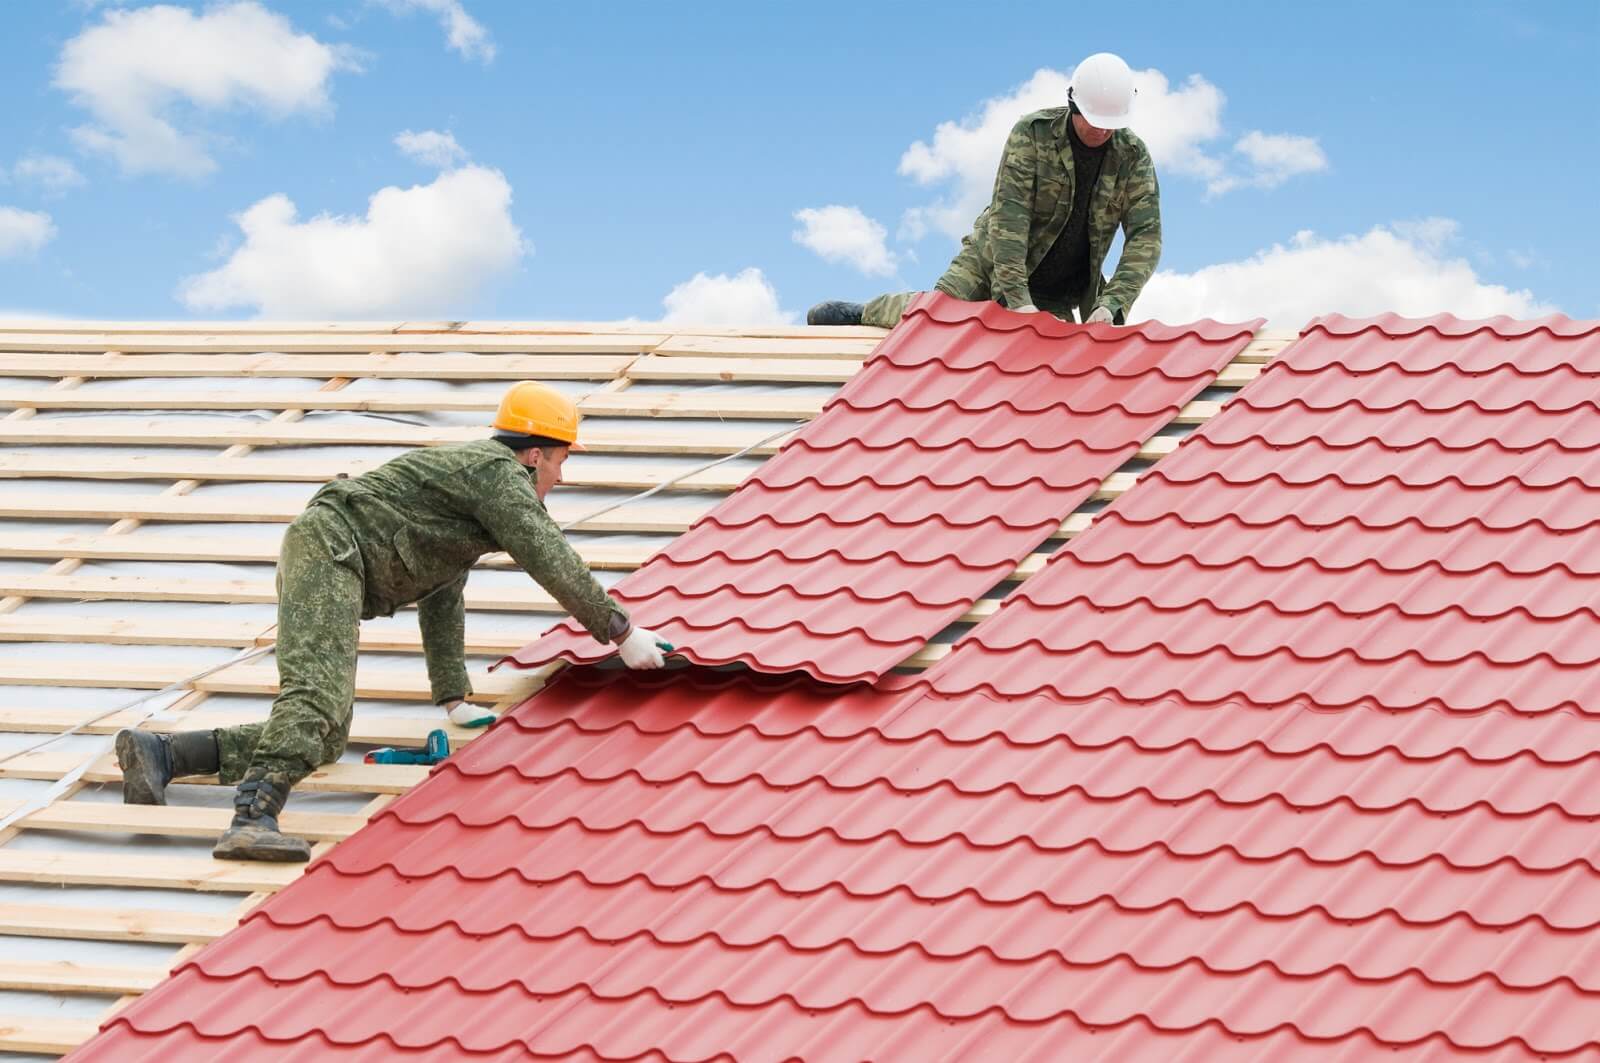 Choosing the Right Roofing Materials for Your Mobile Home